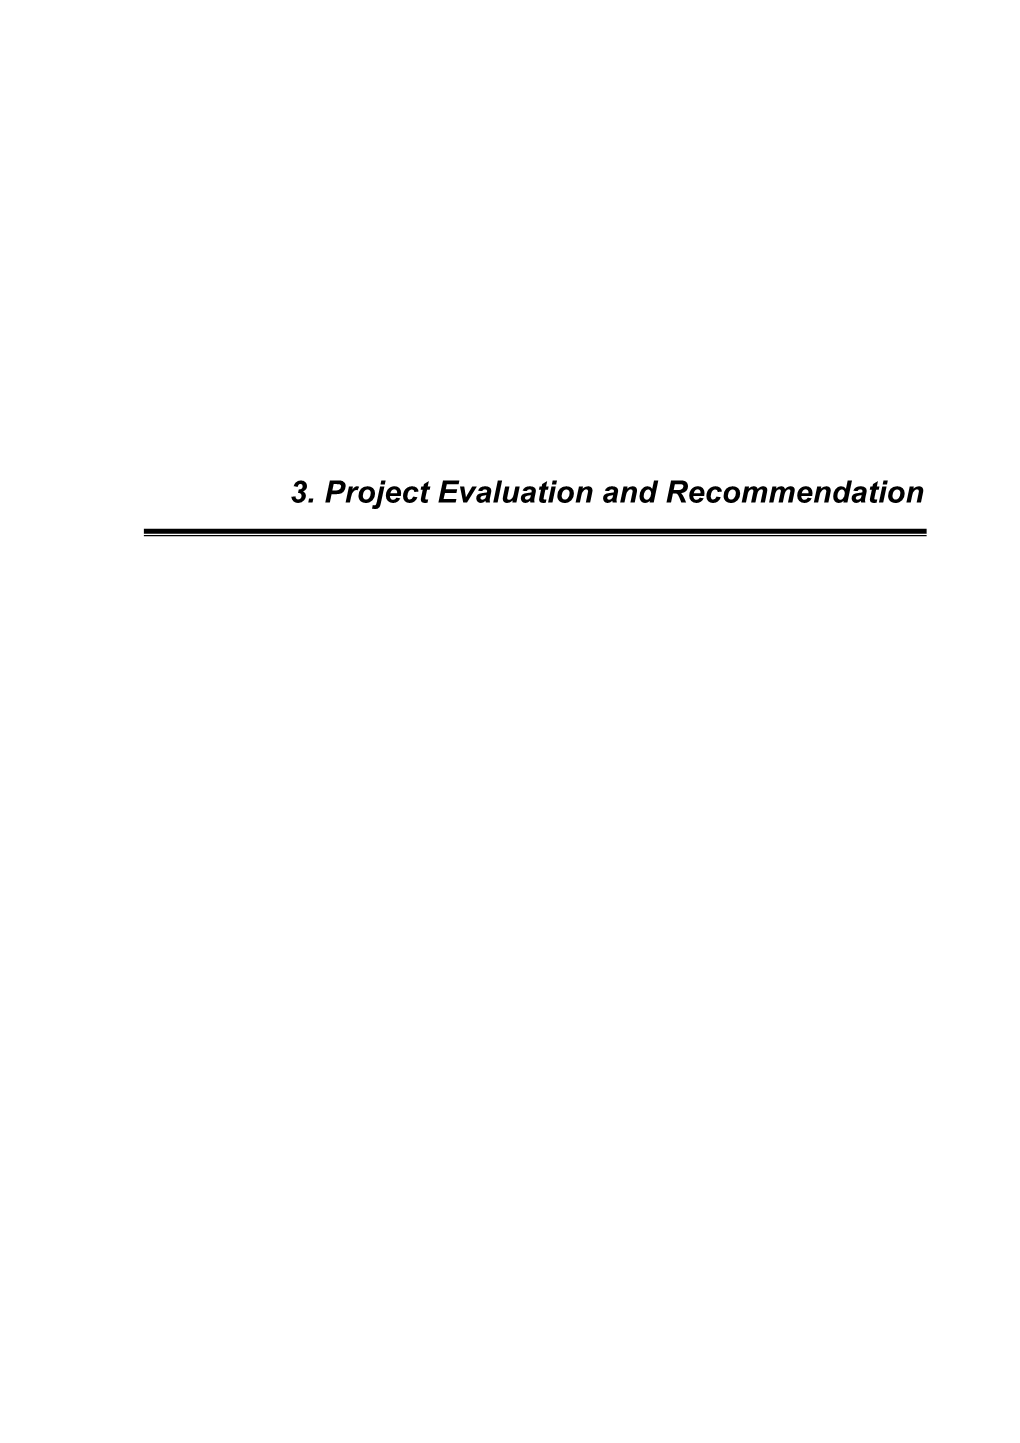 3. Project Evaluation and Recommendation